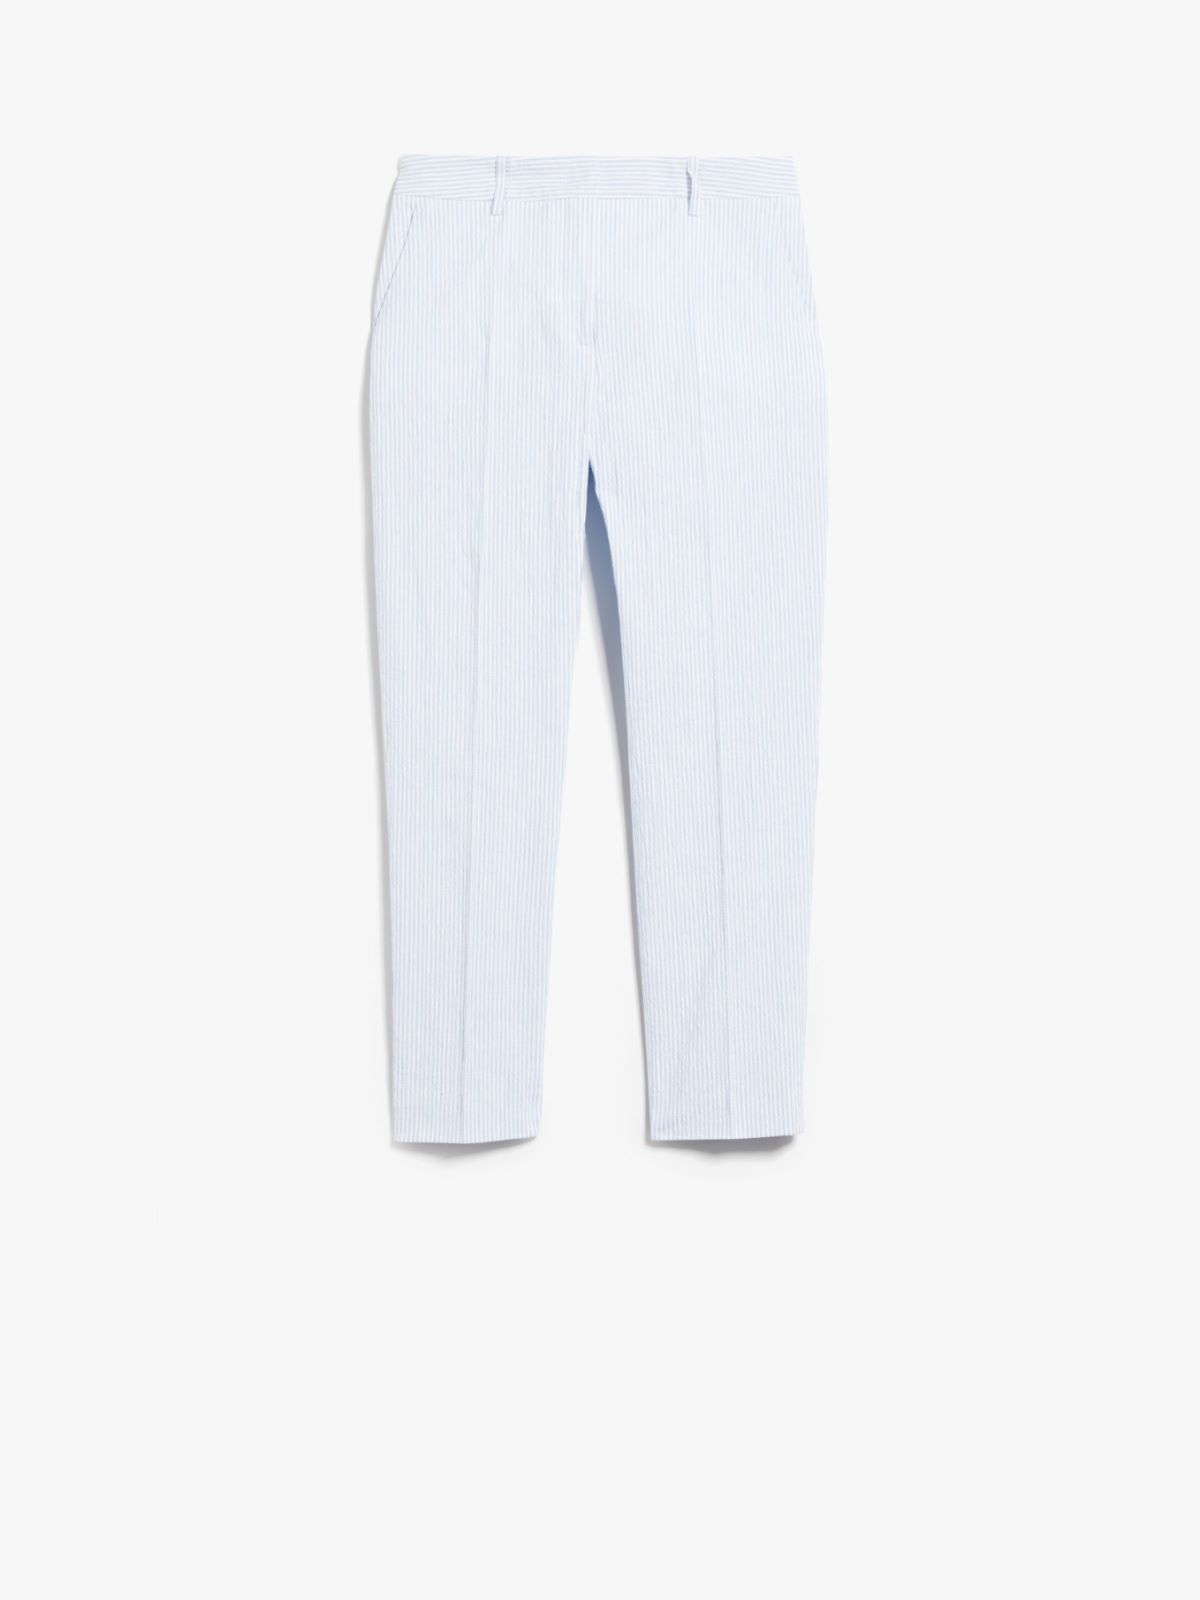 Cotton and linen trousers - LIGHT BLUE - Weekend Max Mara - 5